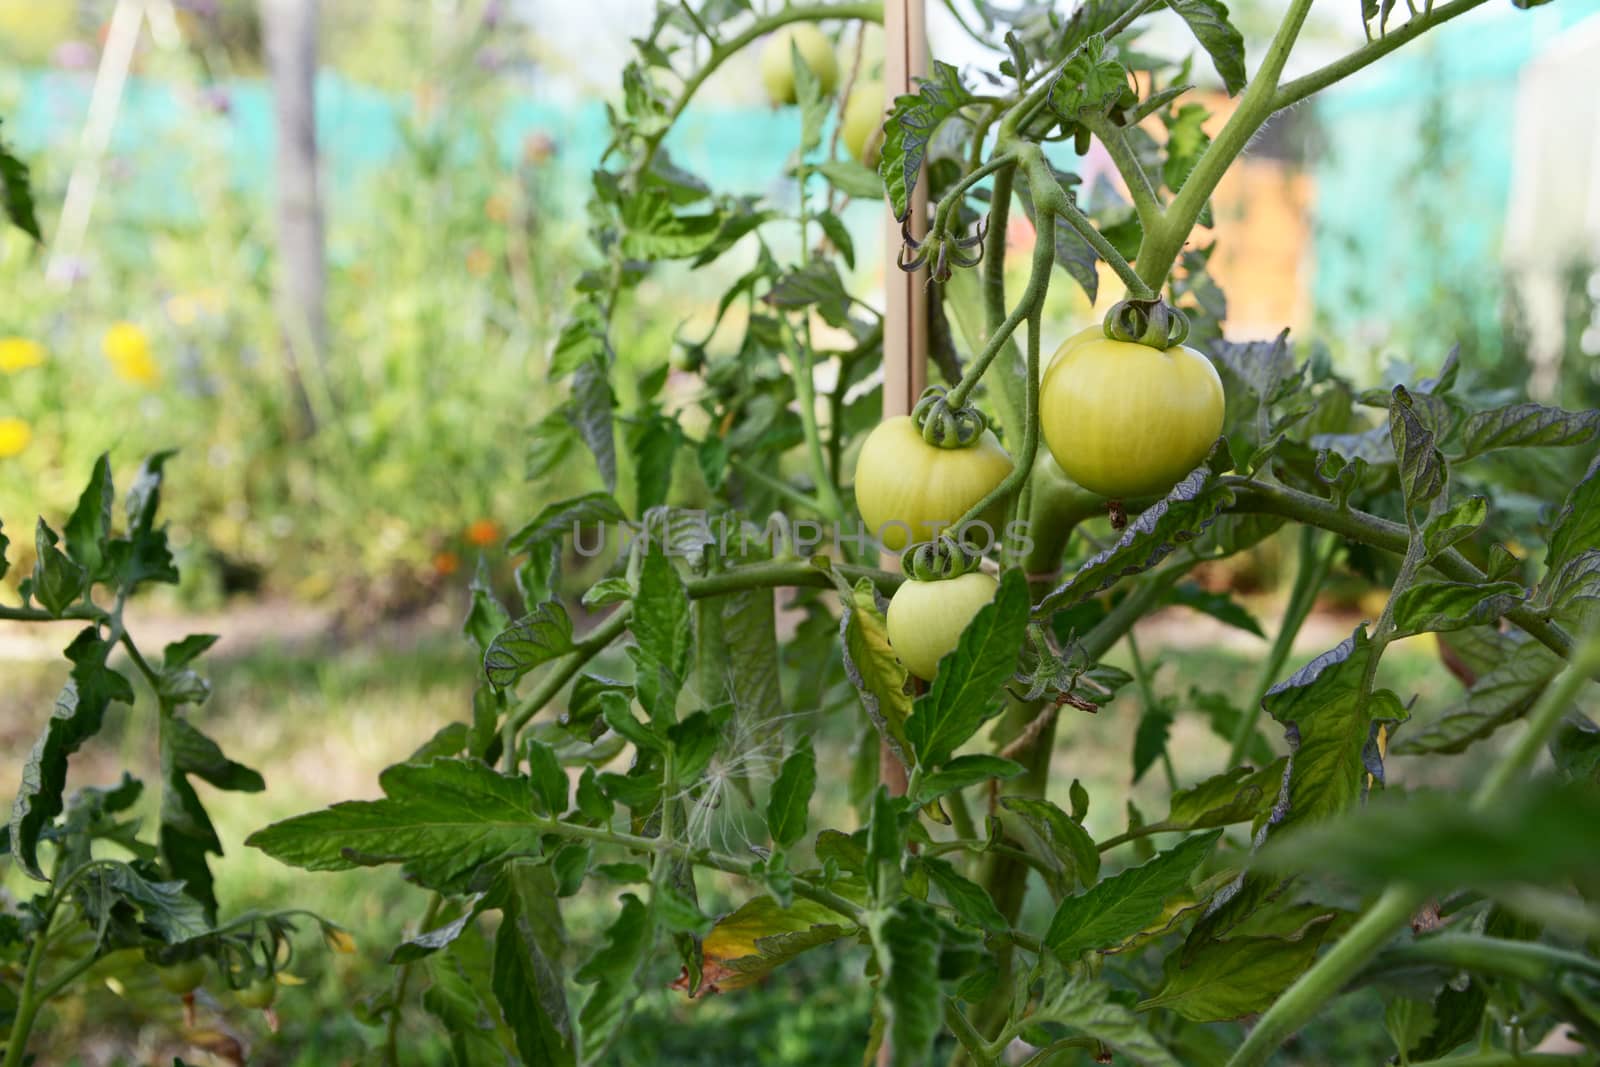 Three Ferline tomato fruits grow among fragrant foliage on a cordon plant in a vegetable garden. Solanum lycopersicum L.